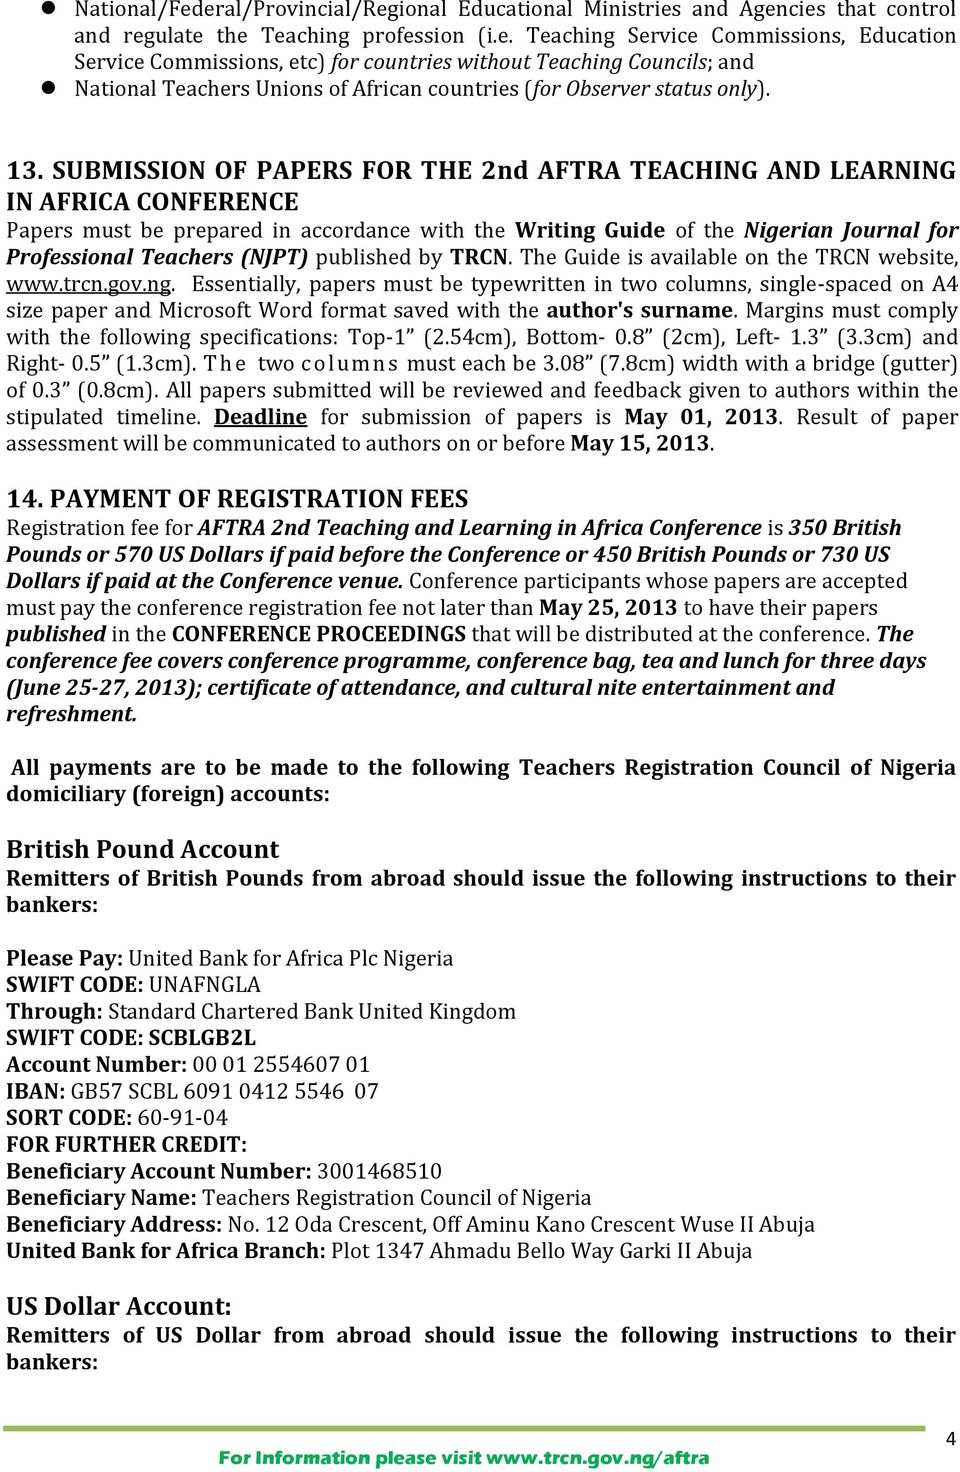 (NJPT) published by TRCN. The Guide is available on the TRCN website, www.trcn.gov.ng.